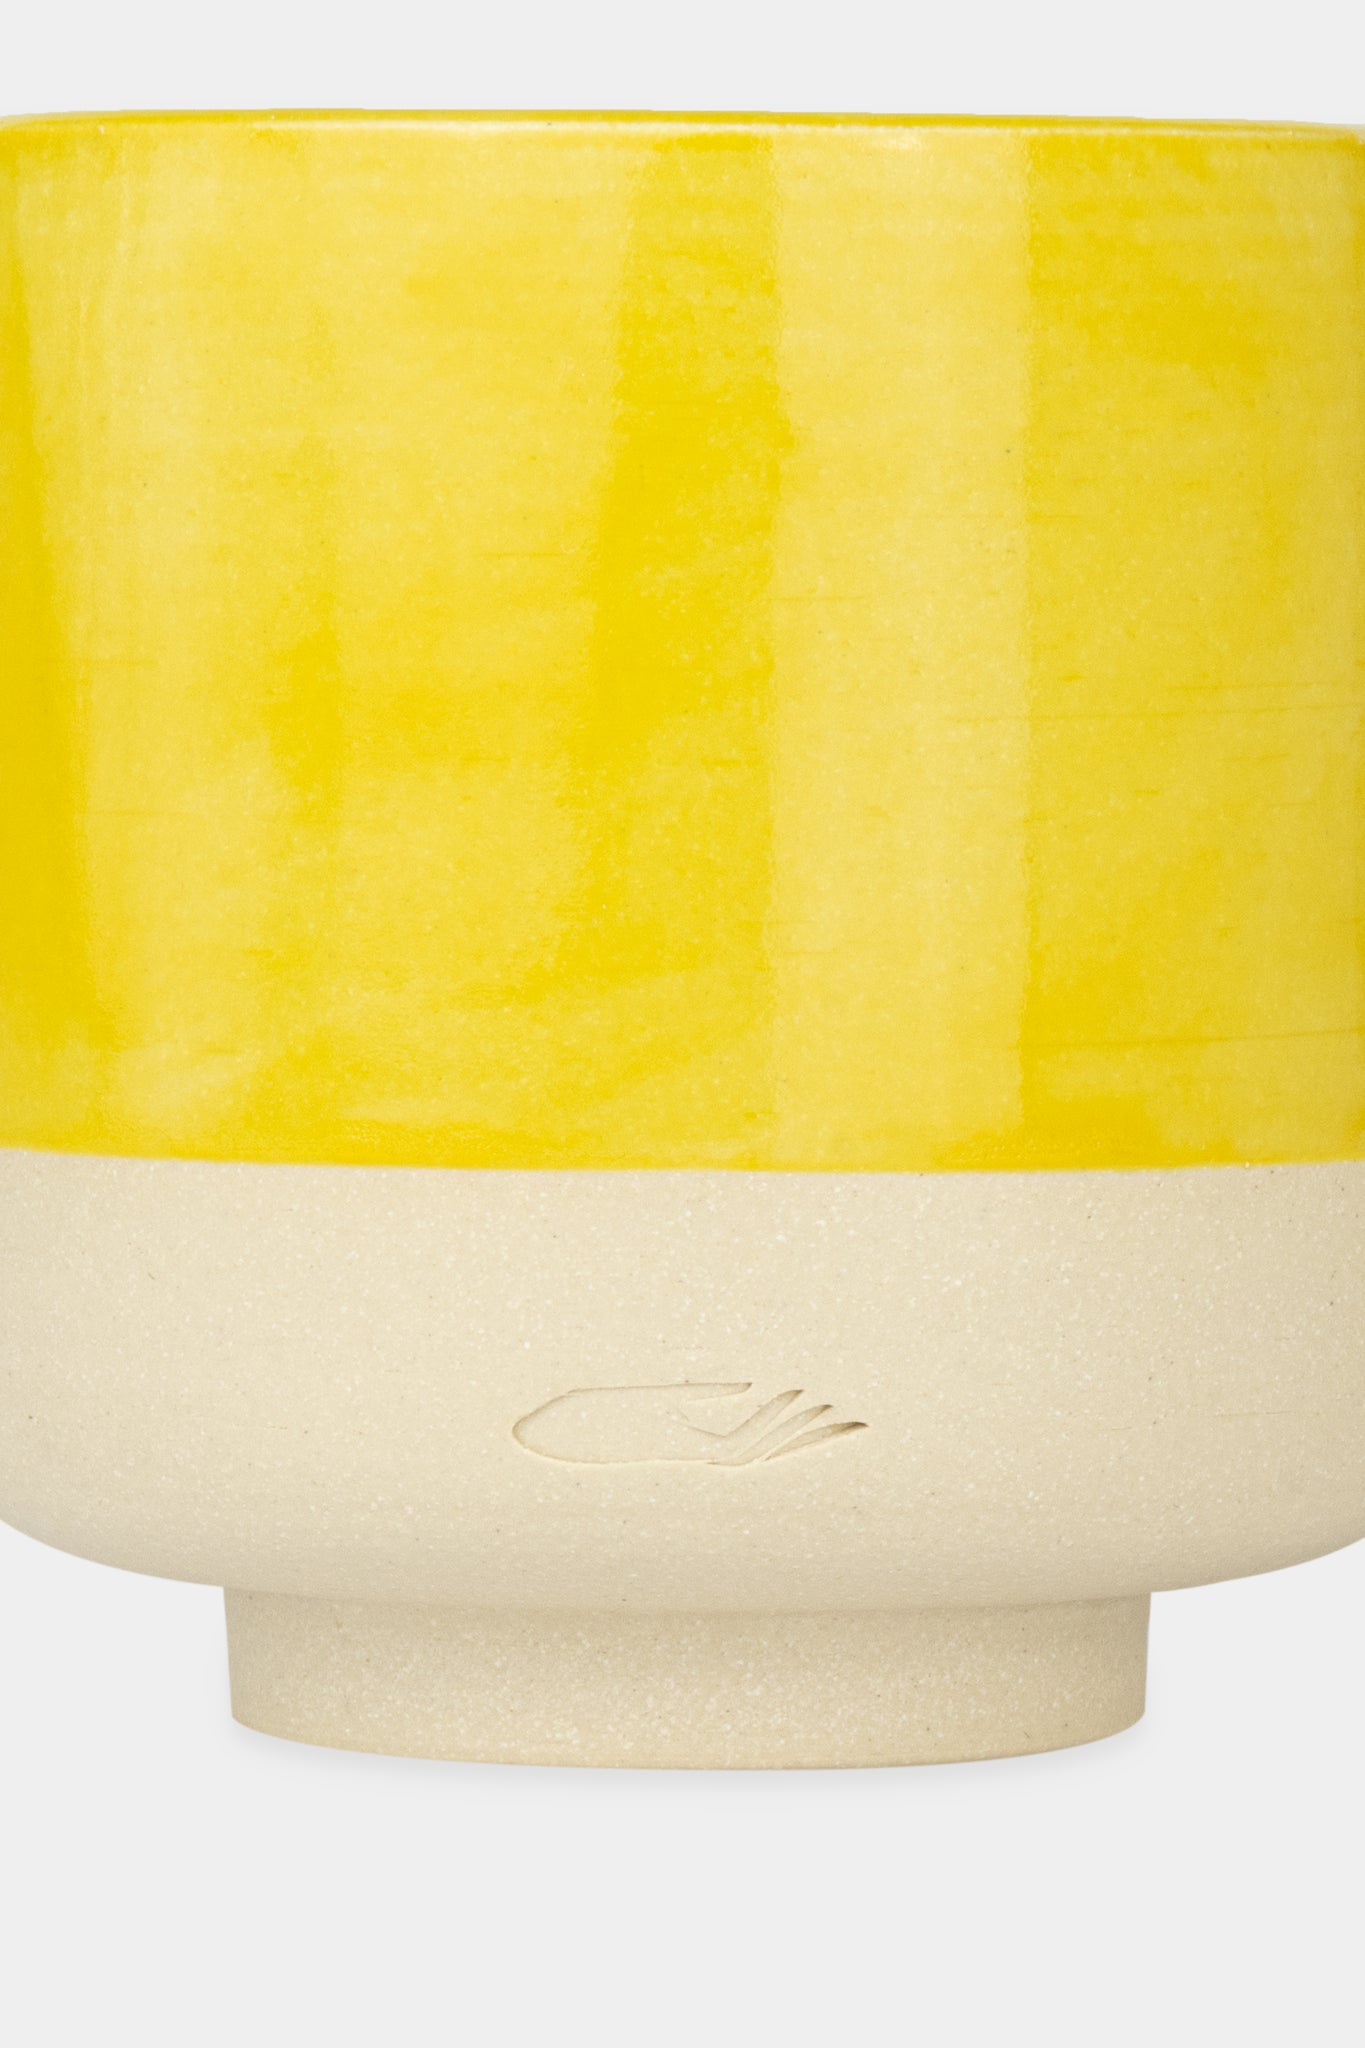 Provide yellow glazed ceramic candle with hand logo imprint (close up)